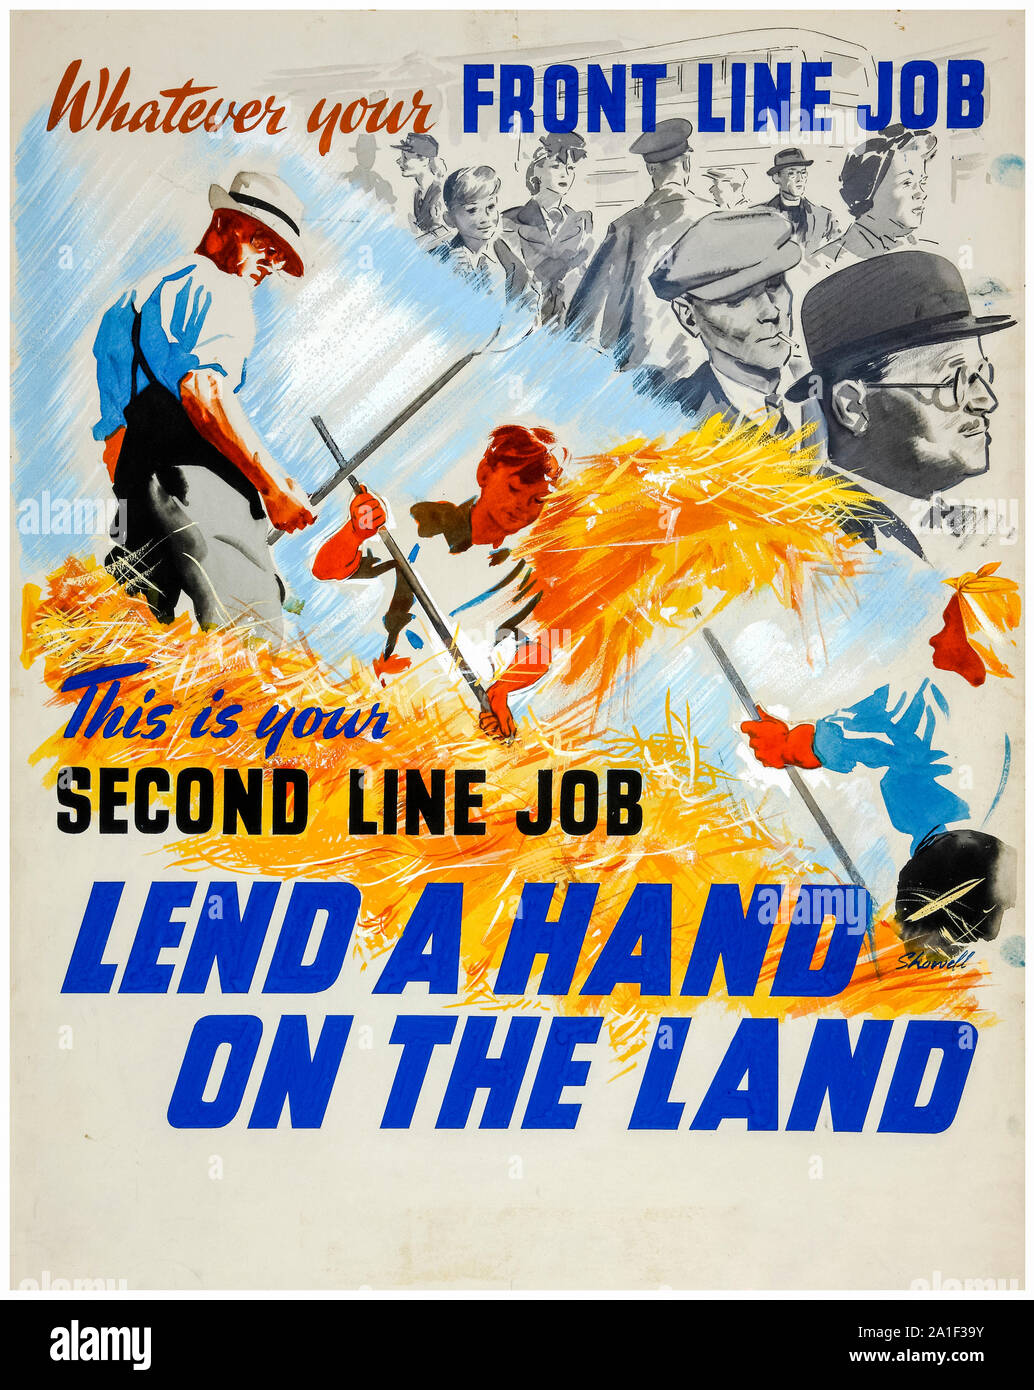 British, WW2, food production, Whatever your front line job this is your second line job, Lend a hand on the land, poster, 1939-1946 Stock Photo